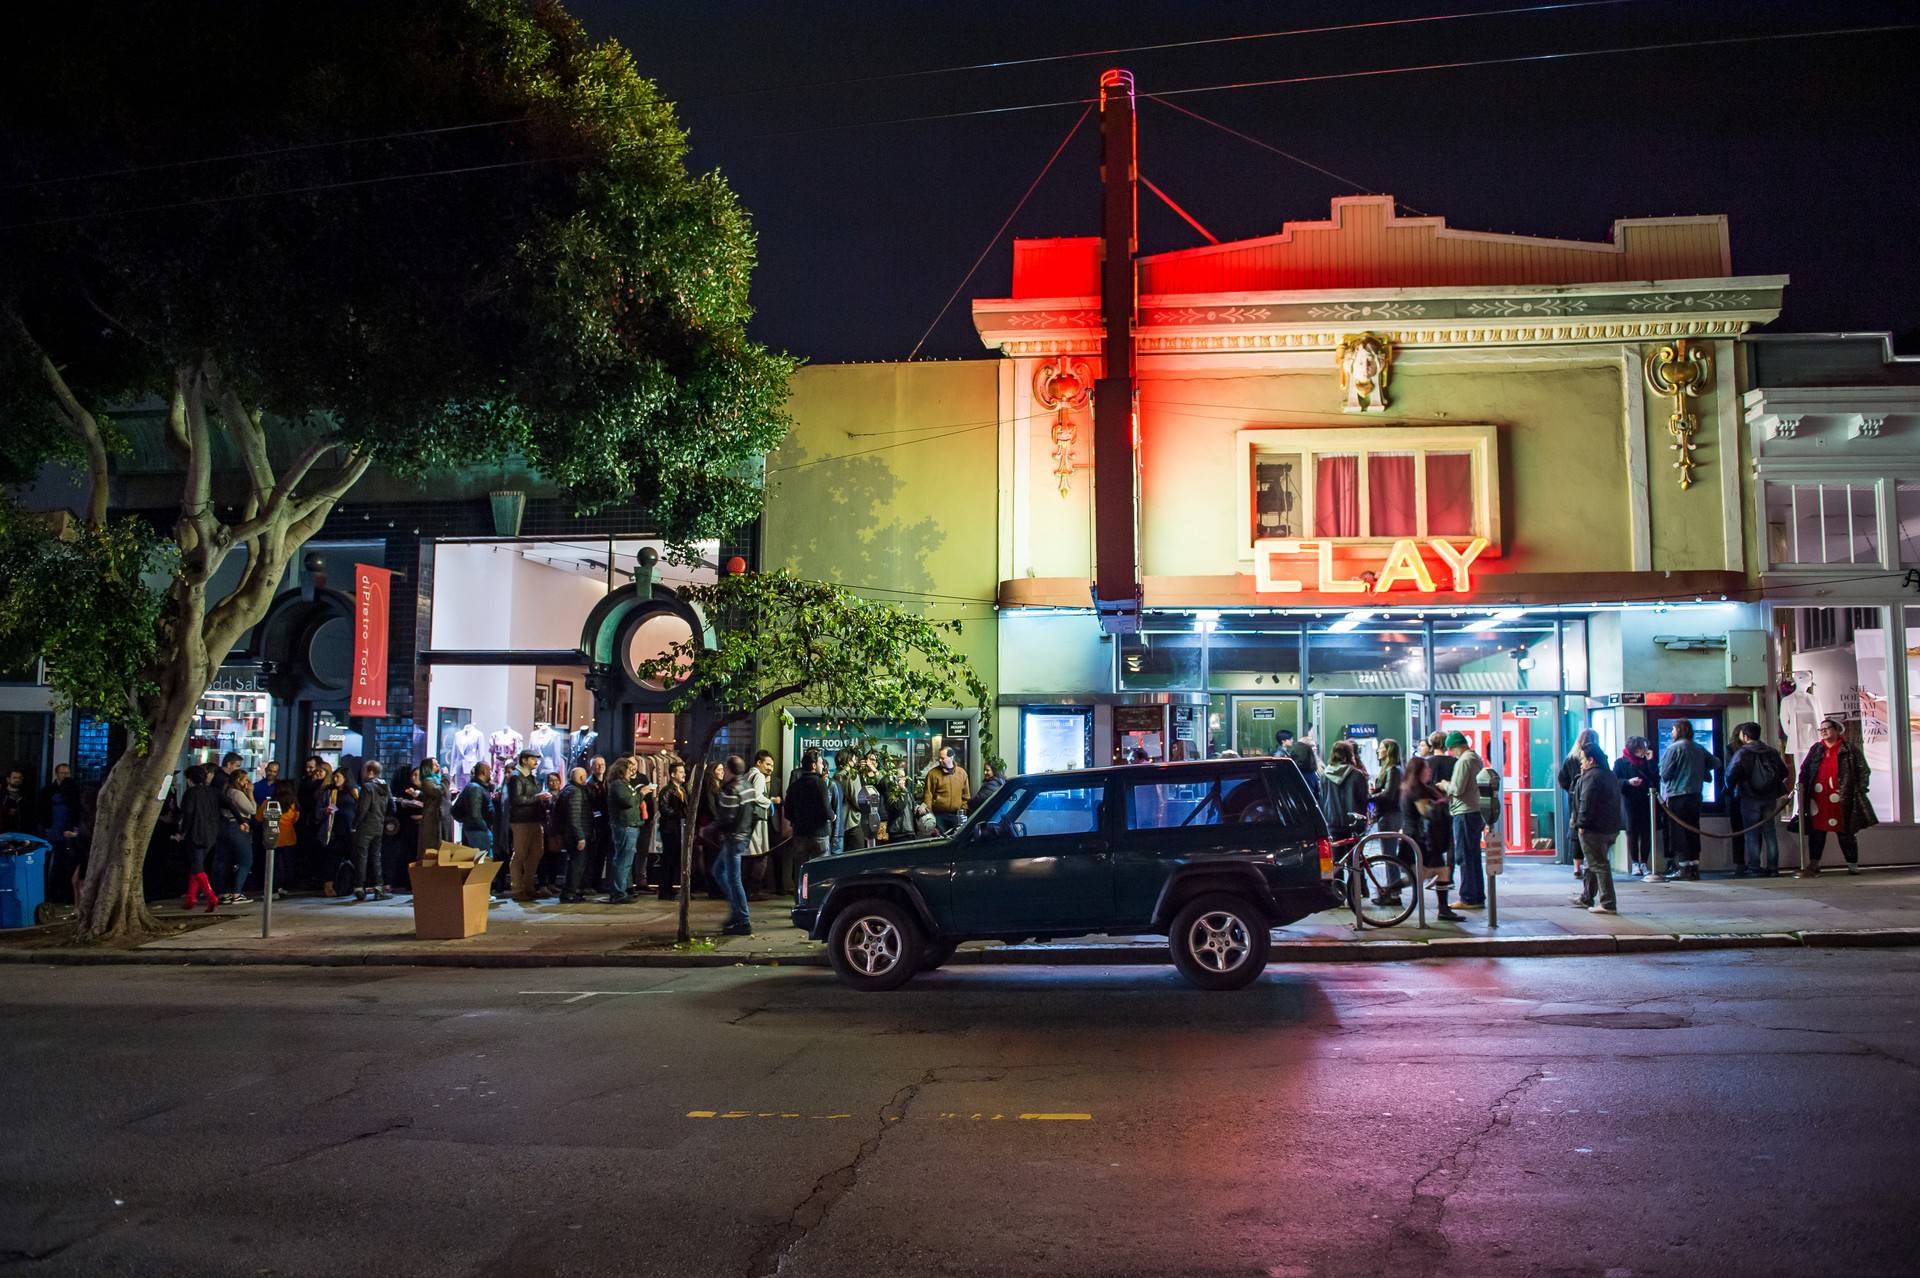 Crowds line the sidewalk waiting to enter the Clay Theater for a sold-out performance of the Rocky Horror Picture show on Saturday. This midnight movie performance is the last for the theater, which is shutting its doors on Sunday after 110 years. Beth LaBerge/KQED